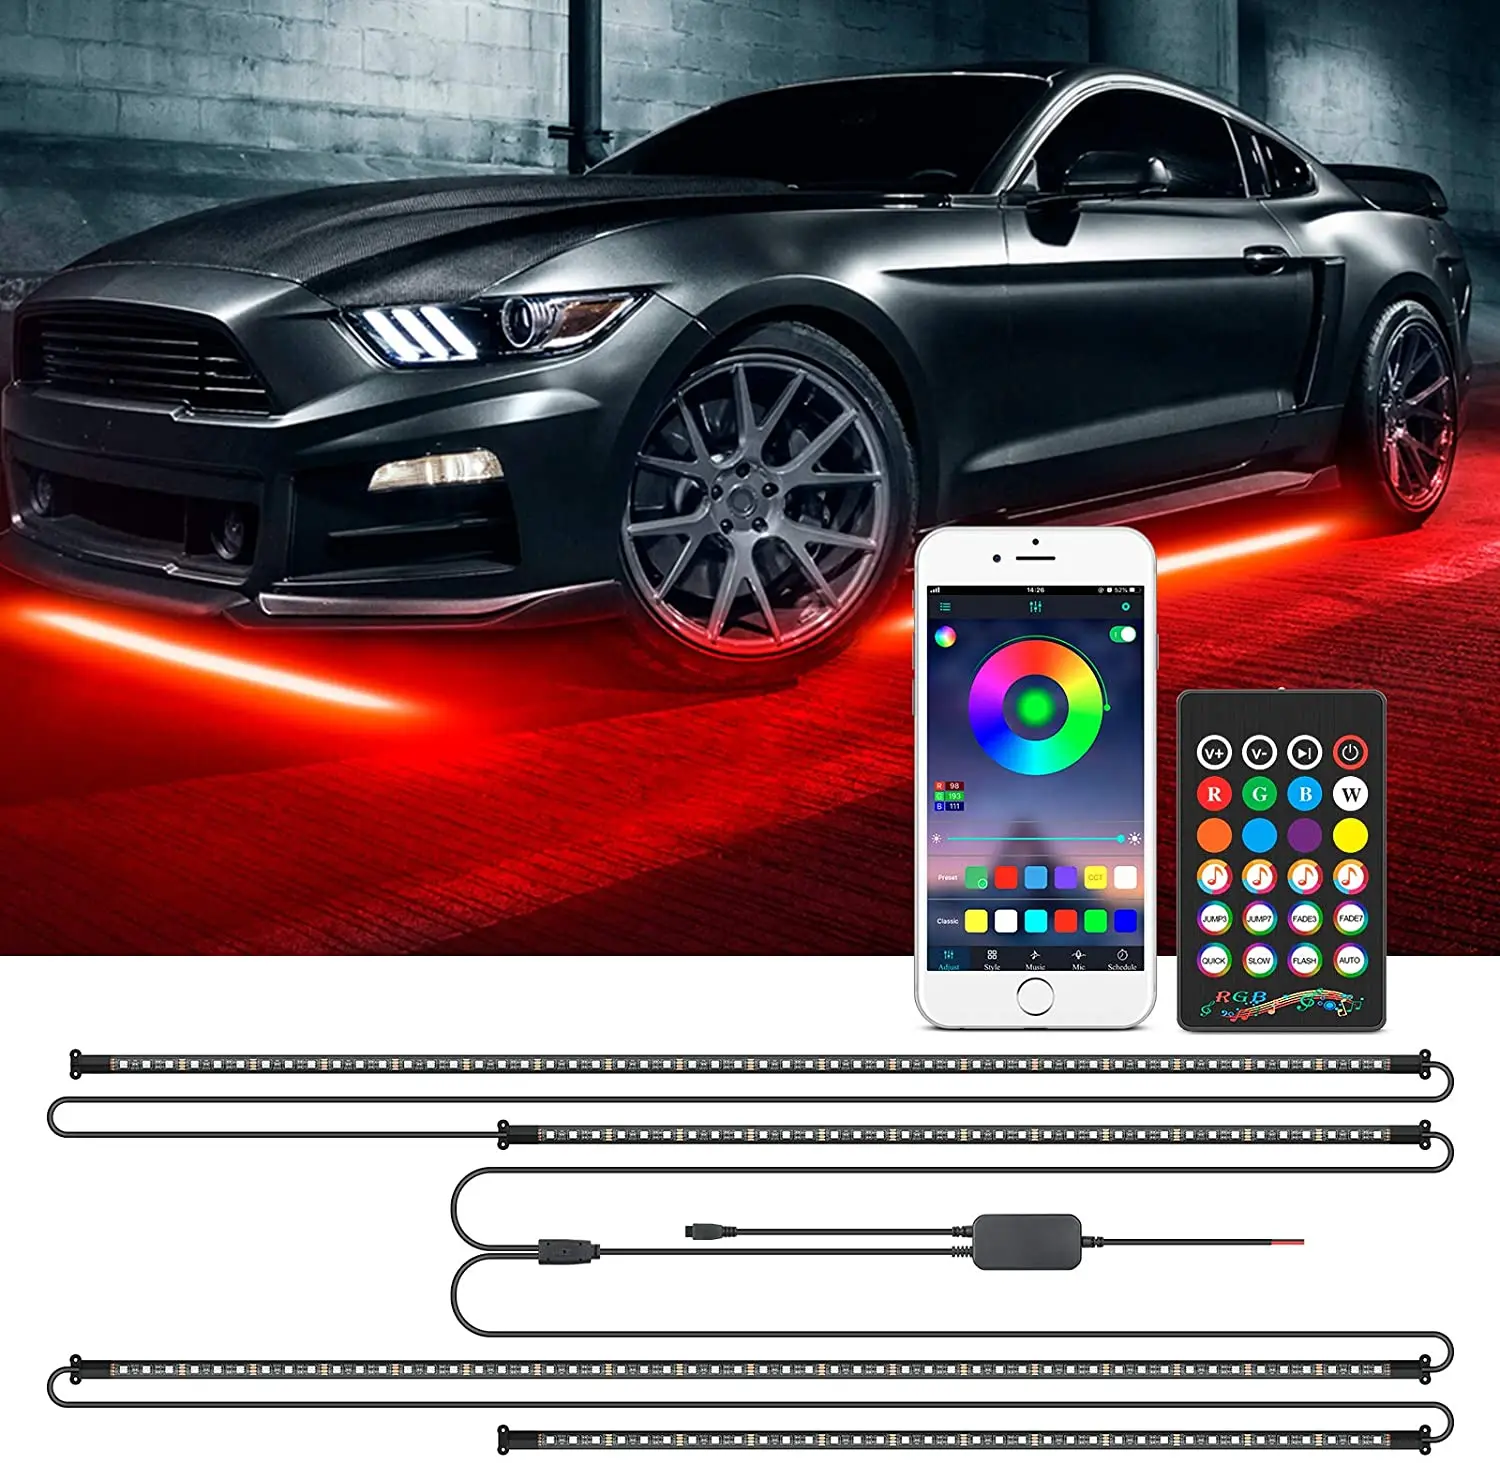 LEDCARE Car Underglow Lights,4Pcs Led Strip Car Lights Underglow Atmosphere Decorative Bar Lights kit,8 Color Neon Accent Lights Strip With Sound Active Function and Wireless APP Control 